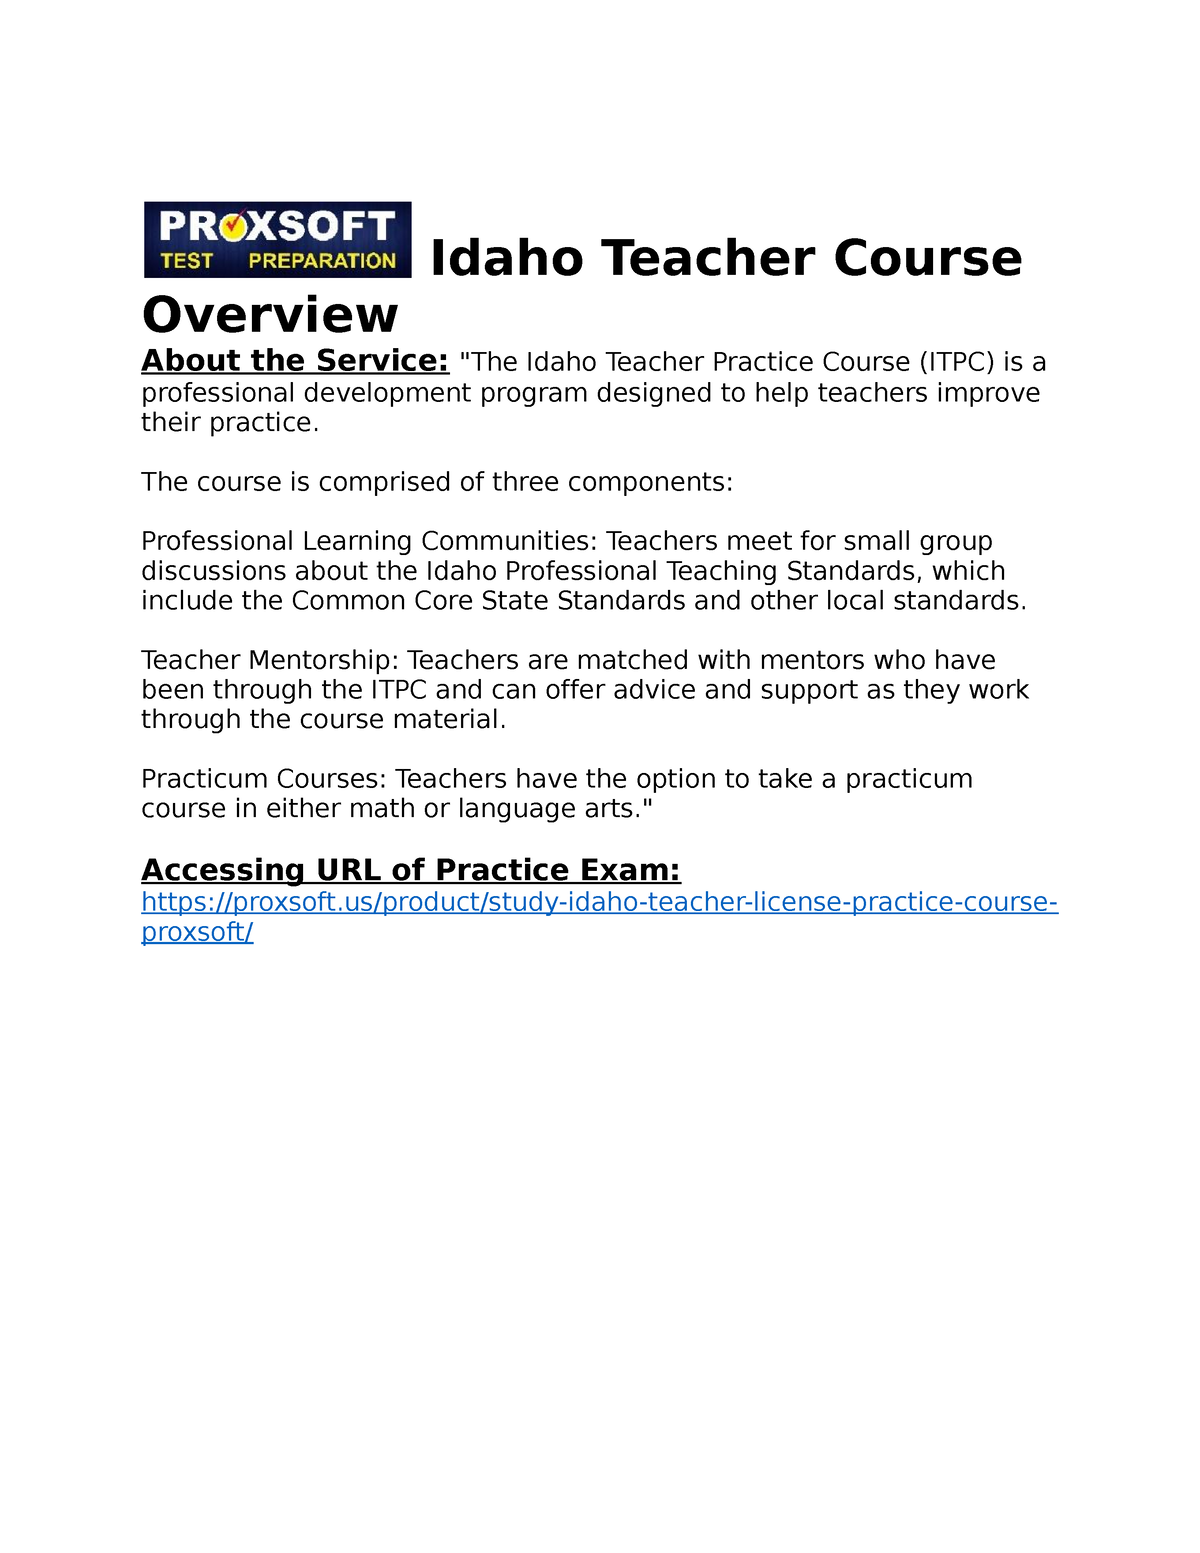 Idaho Teacher Practice Course The course is comprised of three